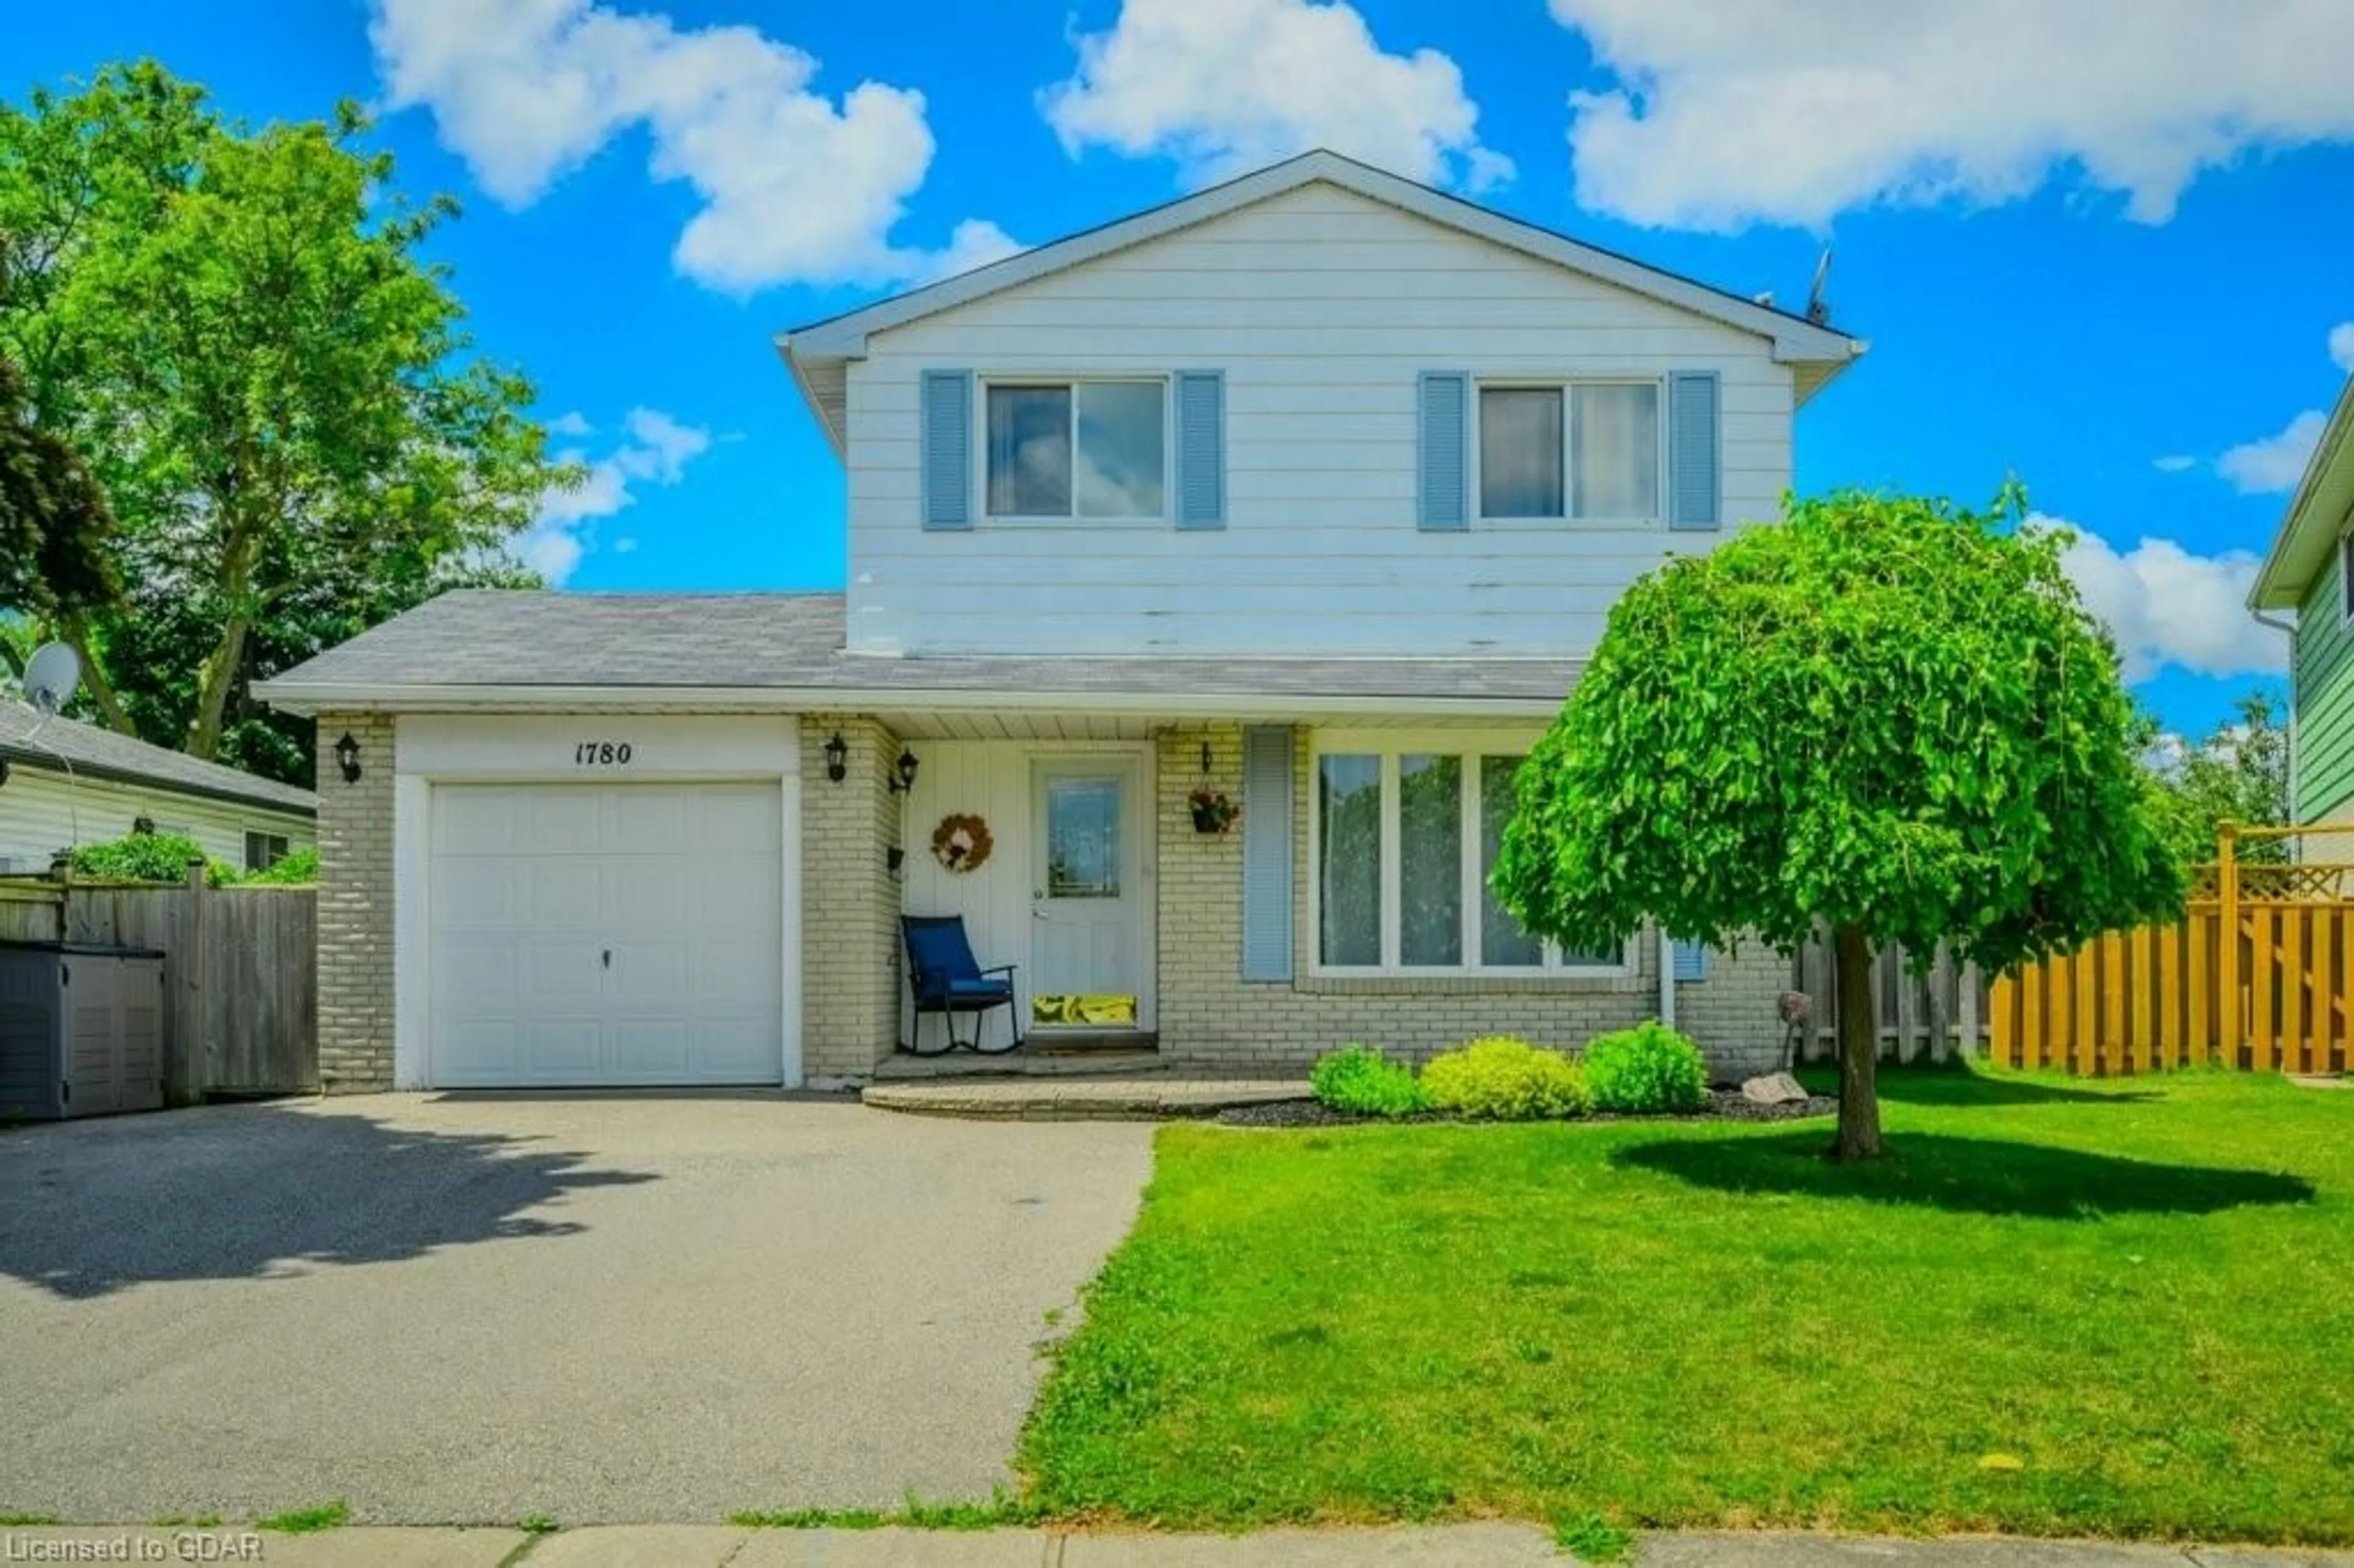 Frontside or backside of a home for 1780 Briarwood Dr, Cambridge Ontario N3H 5A7